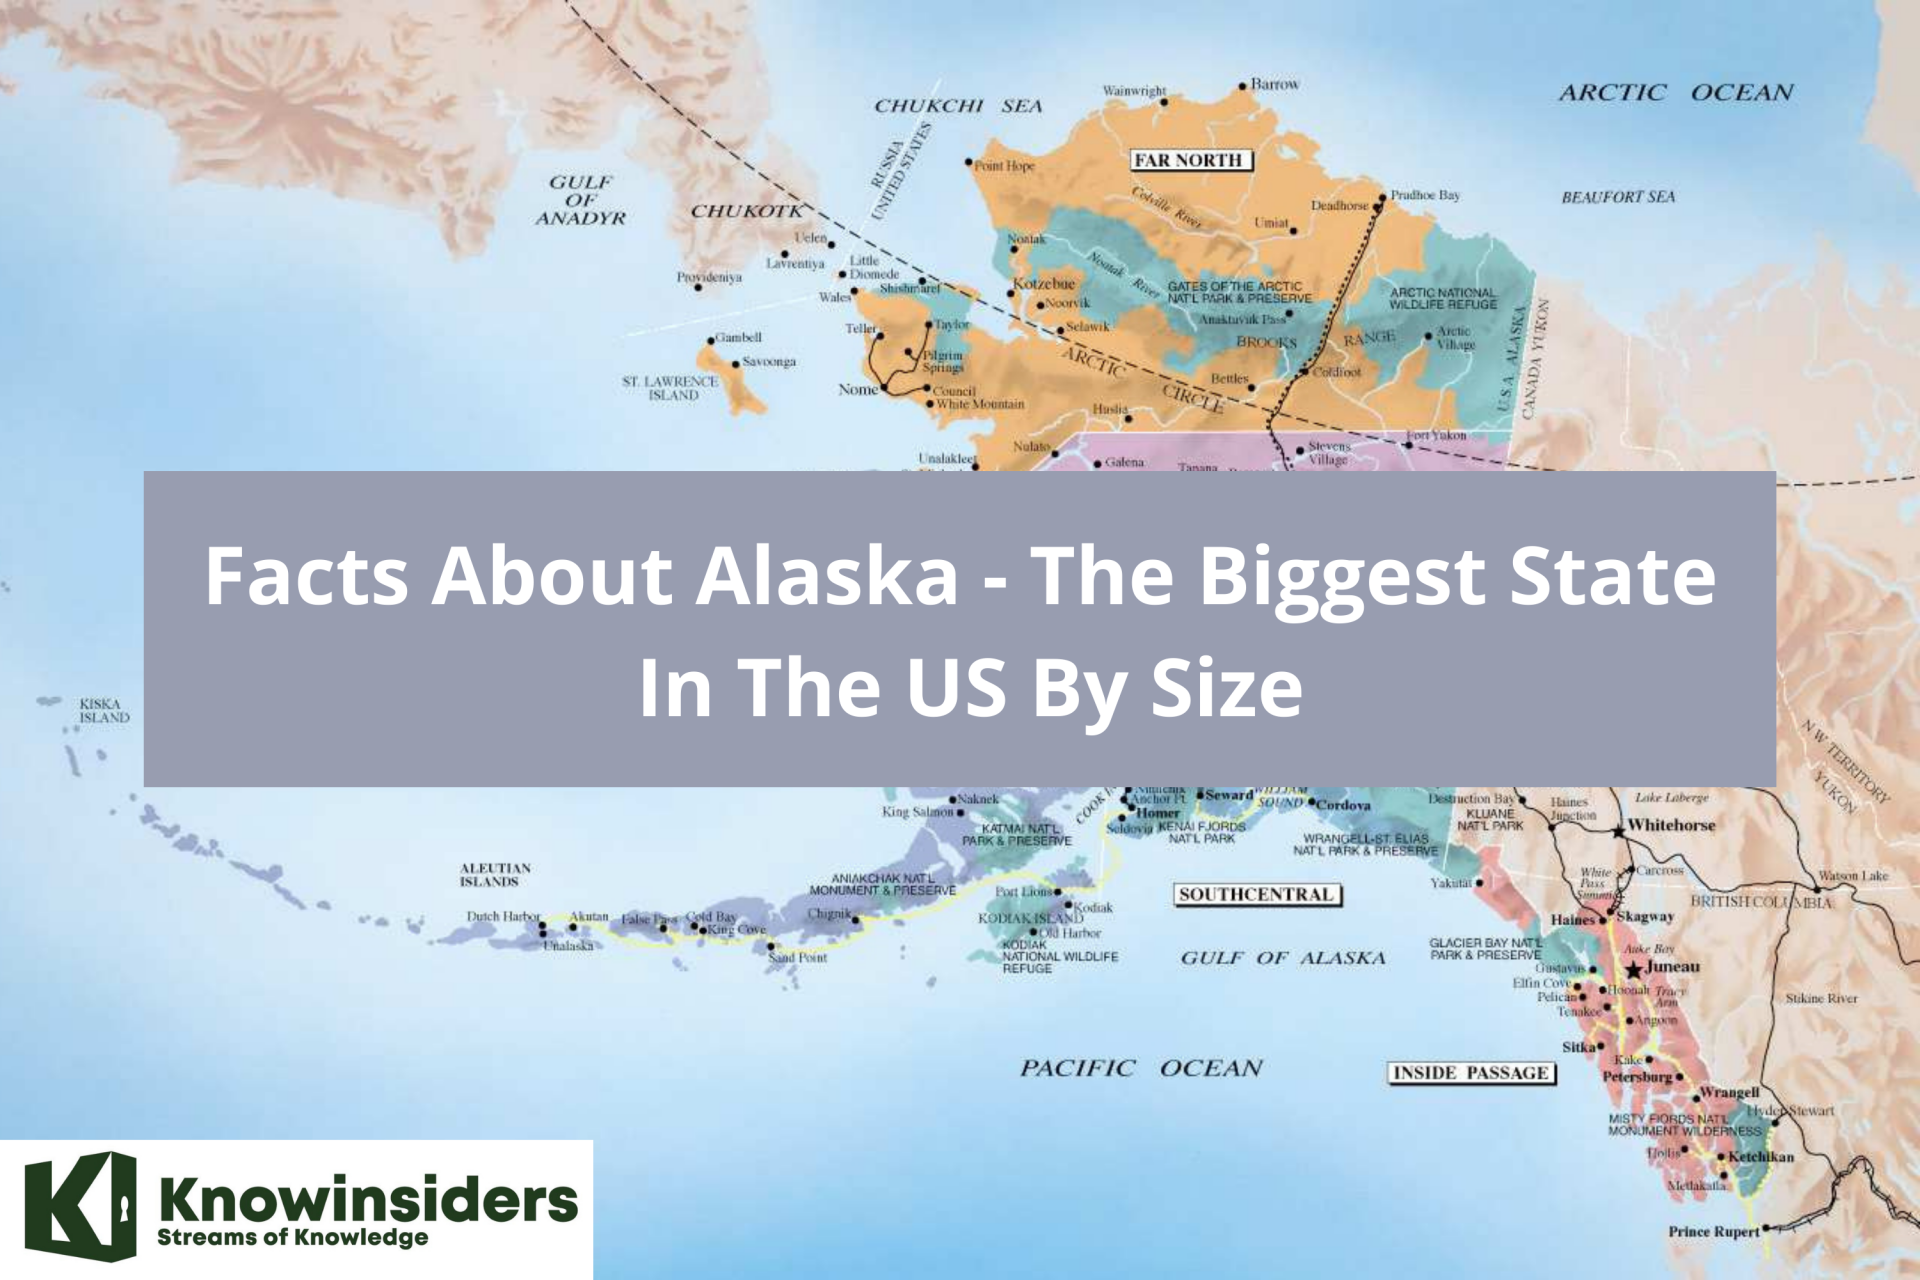 Facts About Alaska - The Biggest State In The US By Size